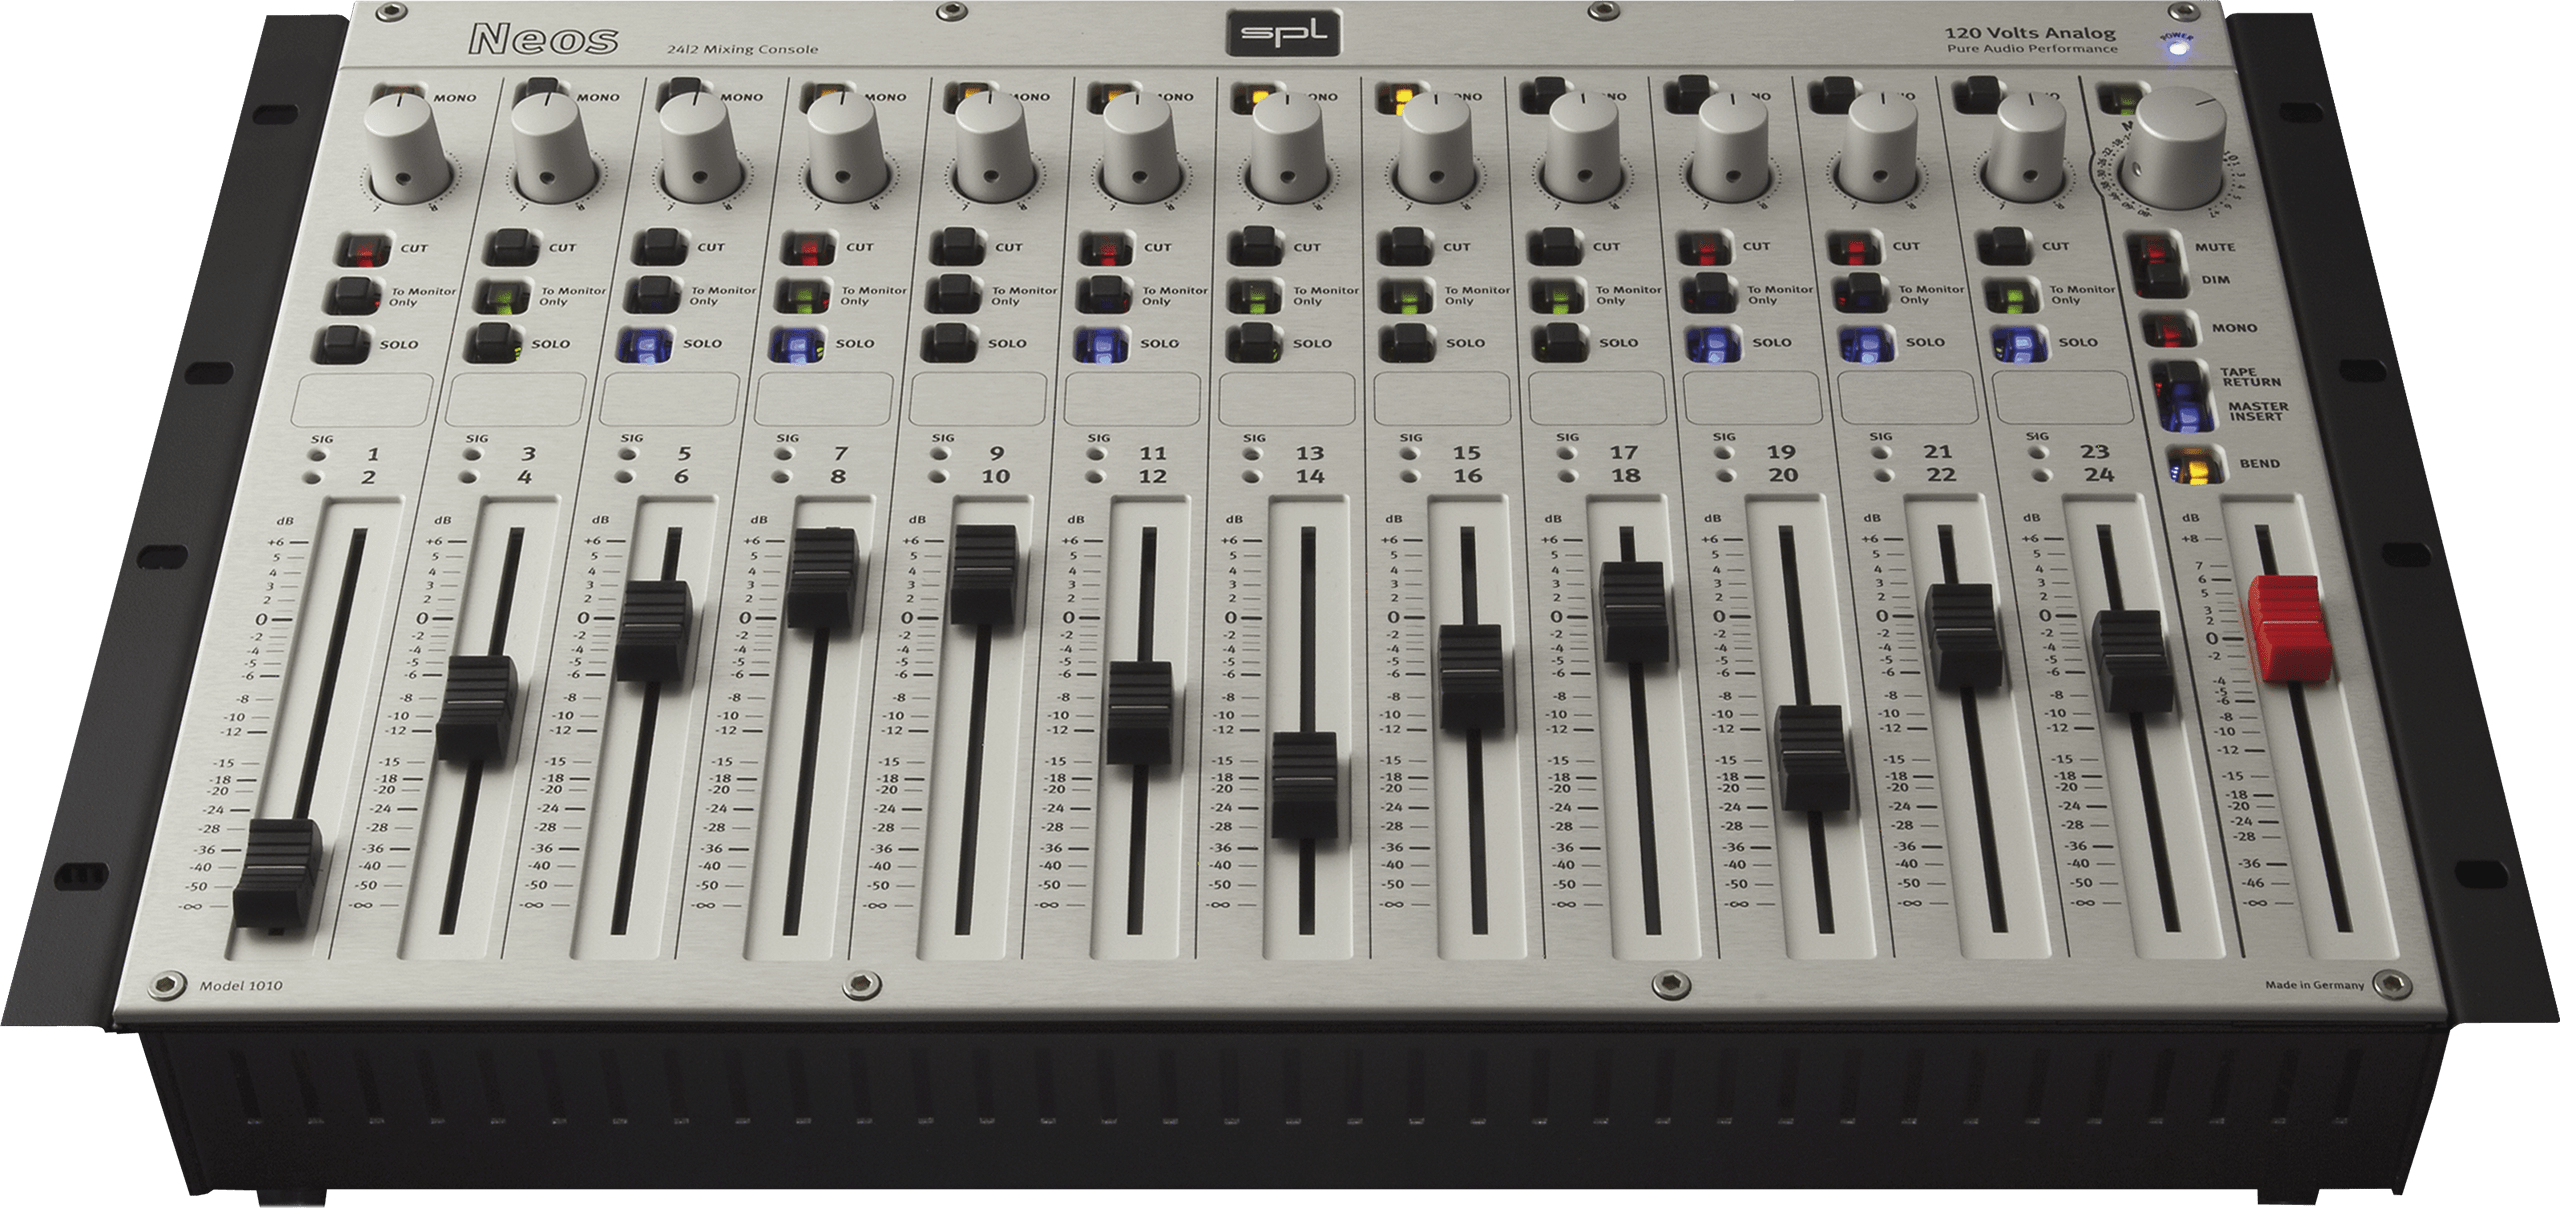 Best Audio Mixer for Streaming in